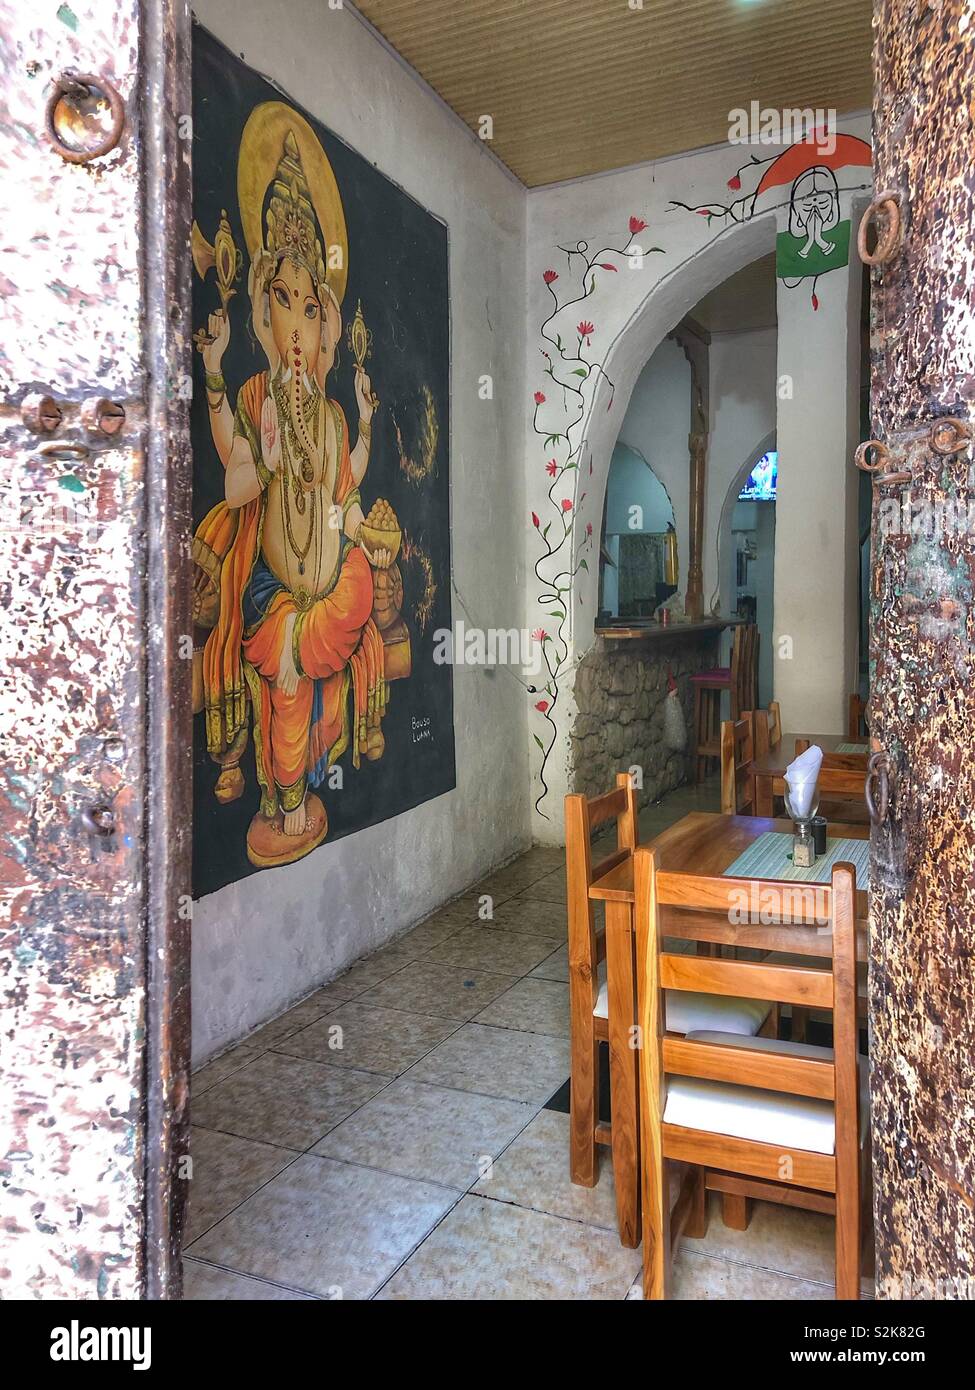 The entrance to a restaurant. Stock Photo